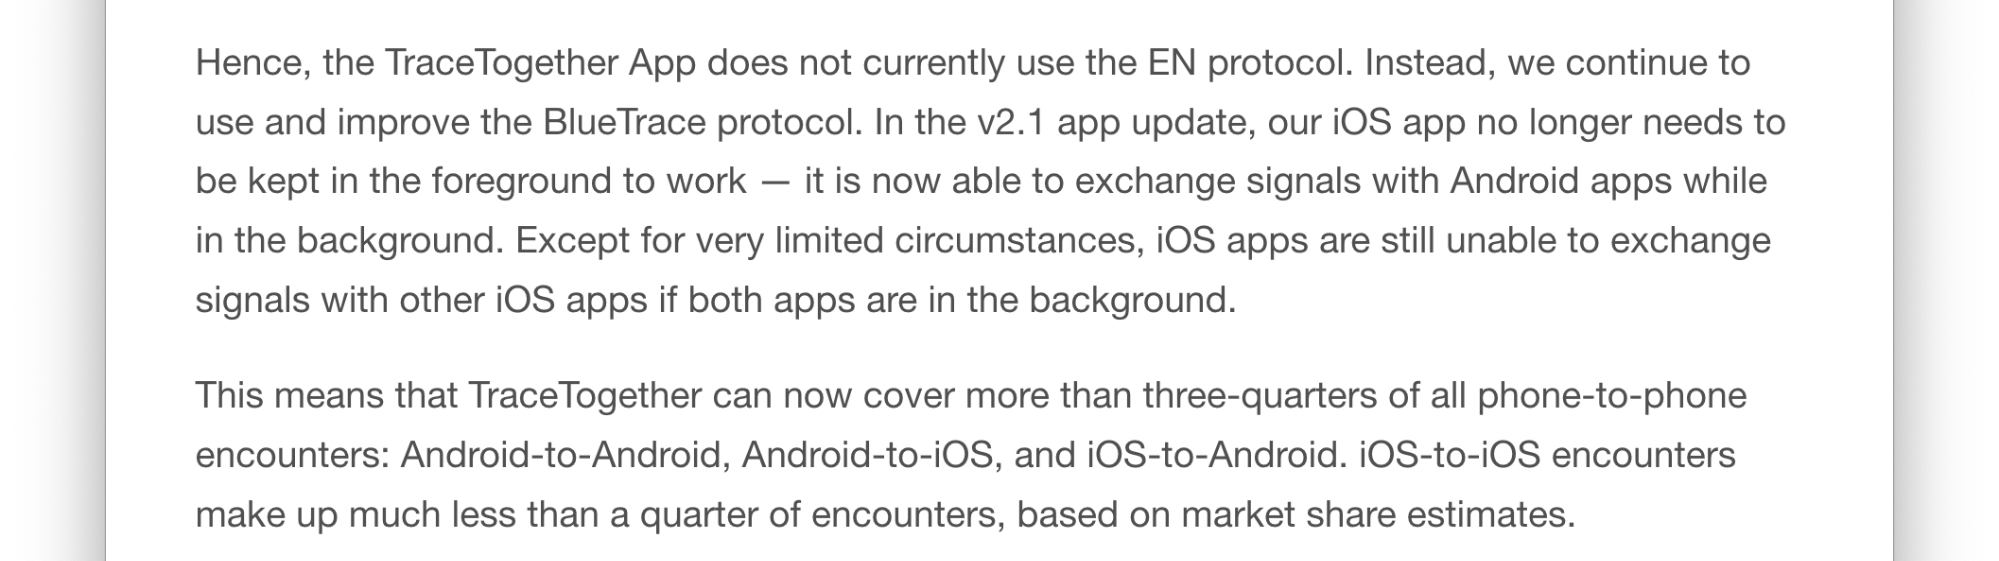 Screen capture of the release notes from the Singaporean application, noting that "Except for very limited circumstances, iOS apps are still unable to exchange signals with other iOS apps if both apps are in the background"